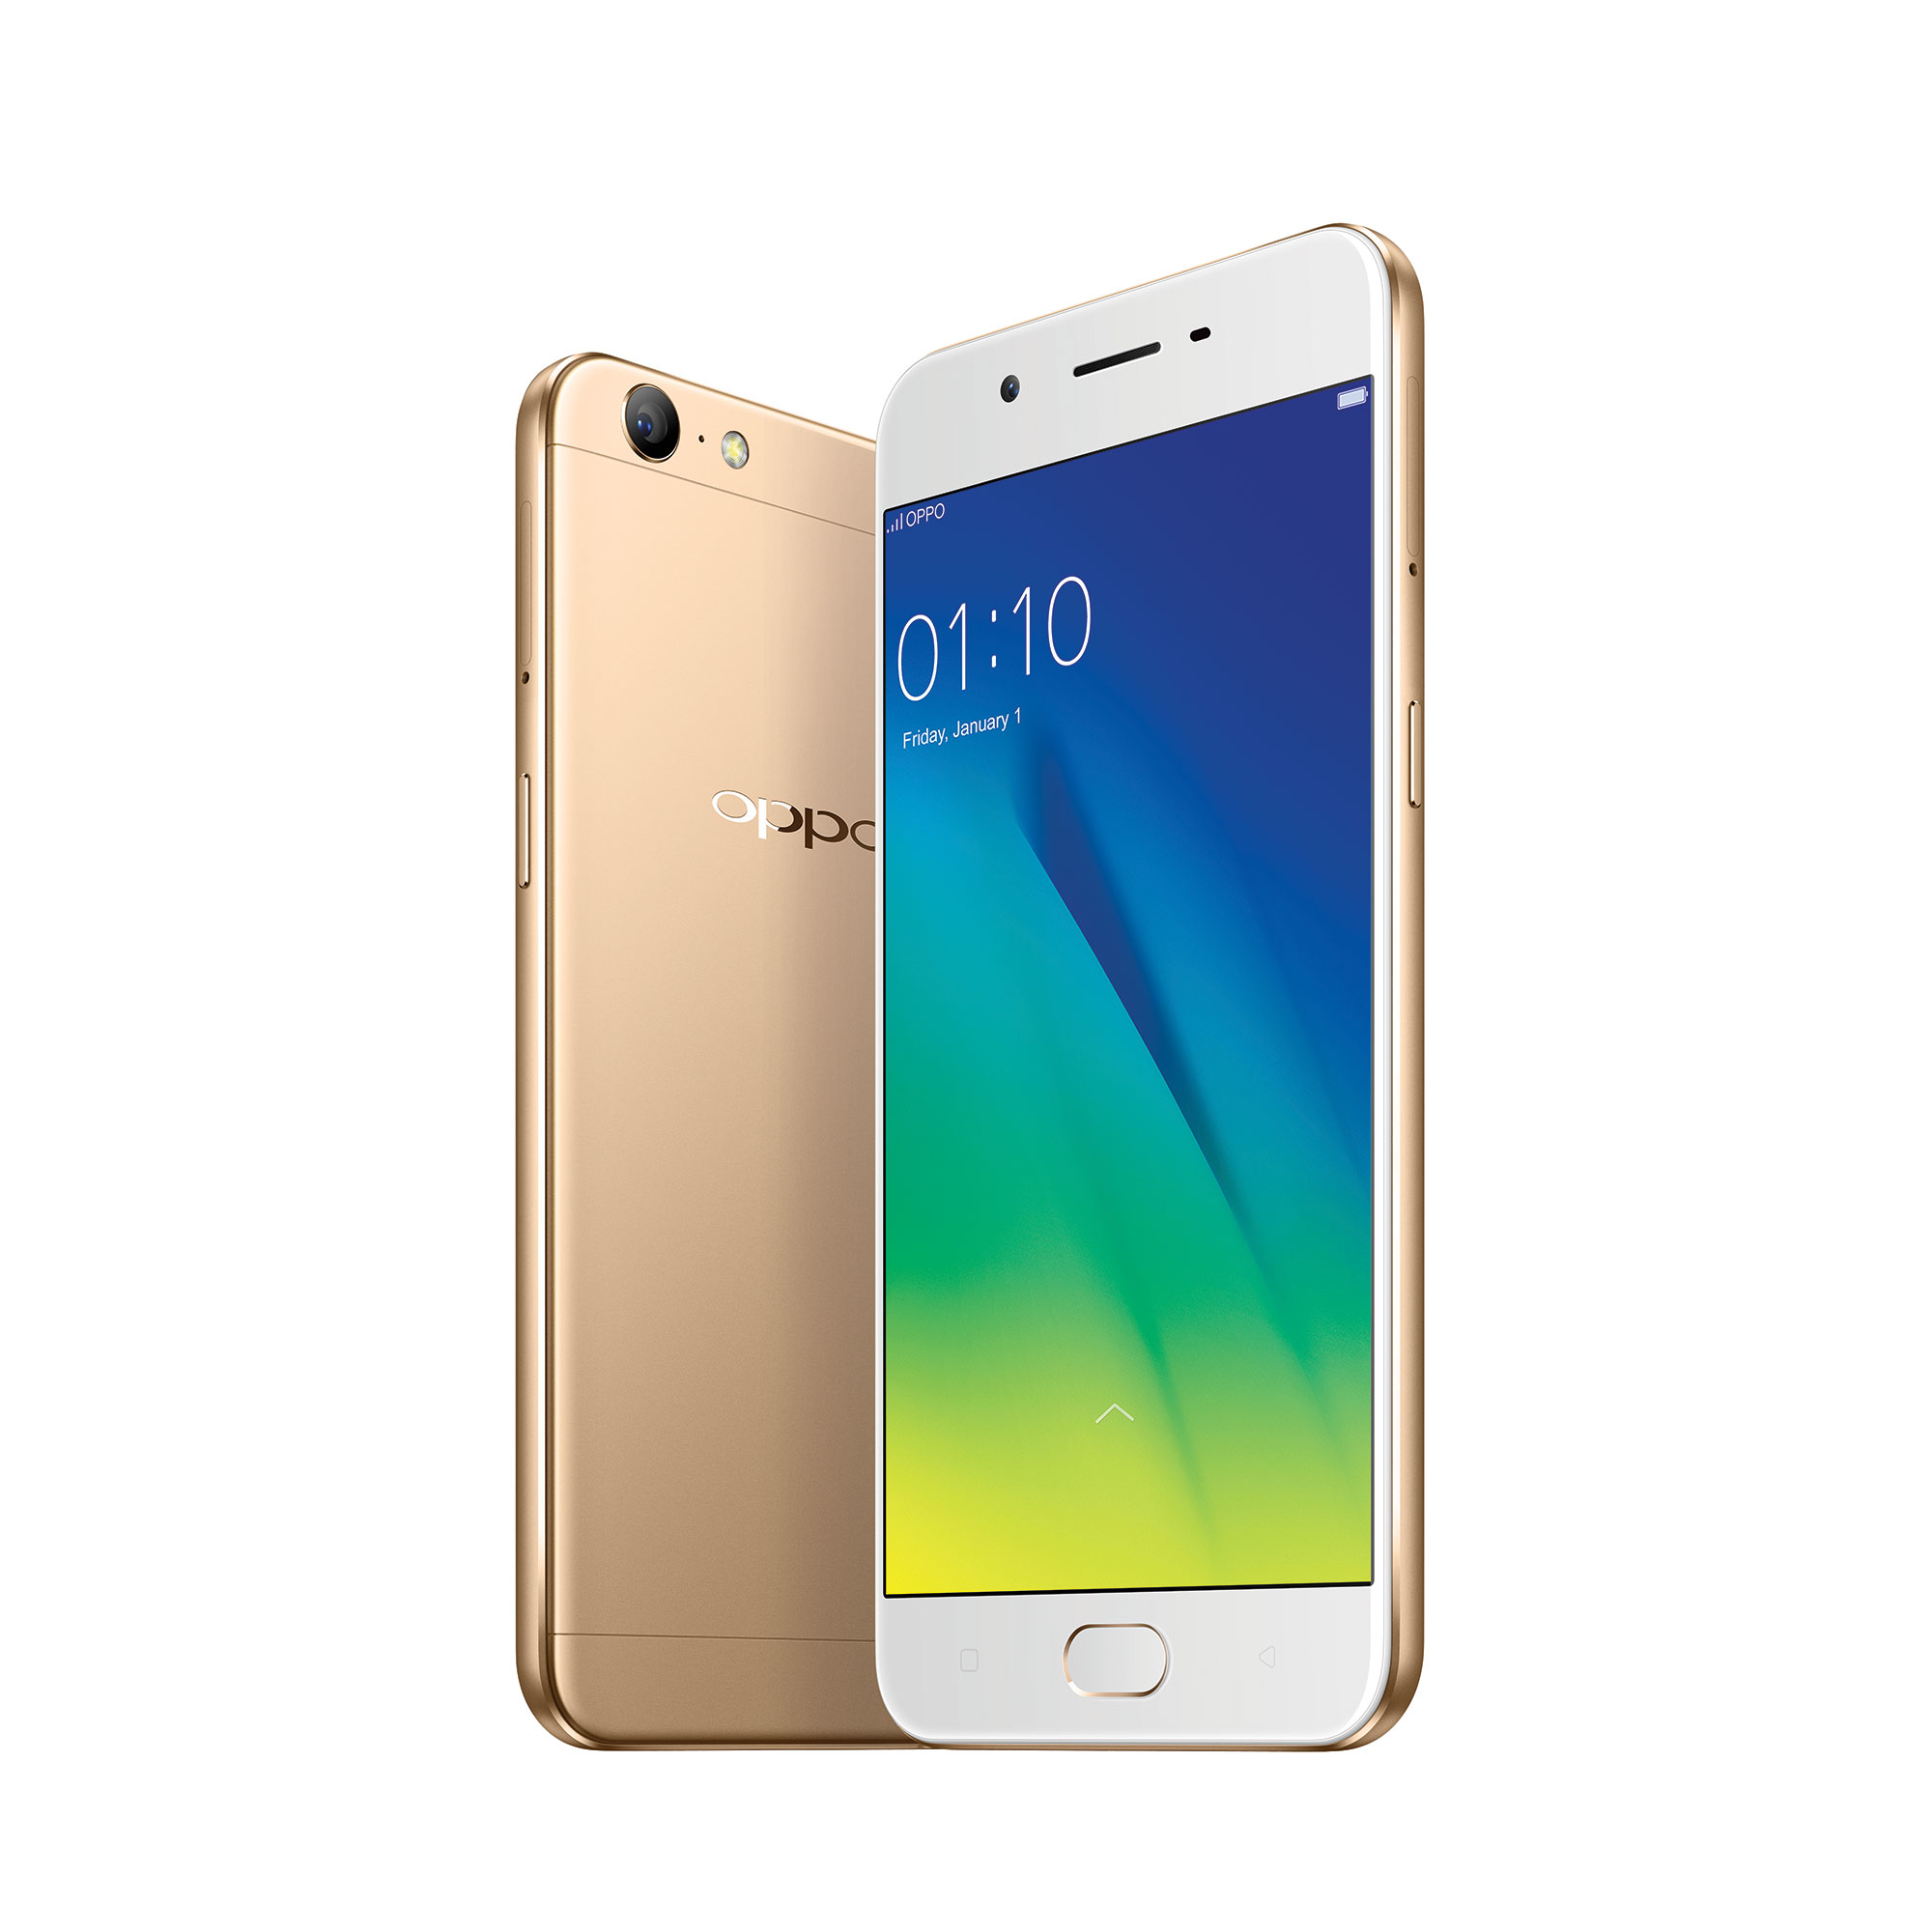 Oppo updates the F1s with a new name, price, processor â€